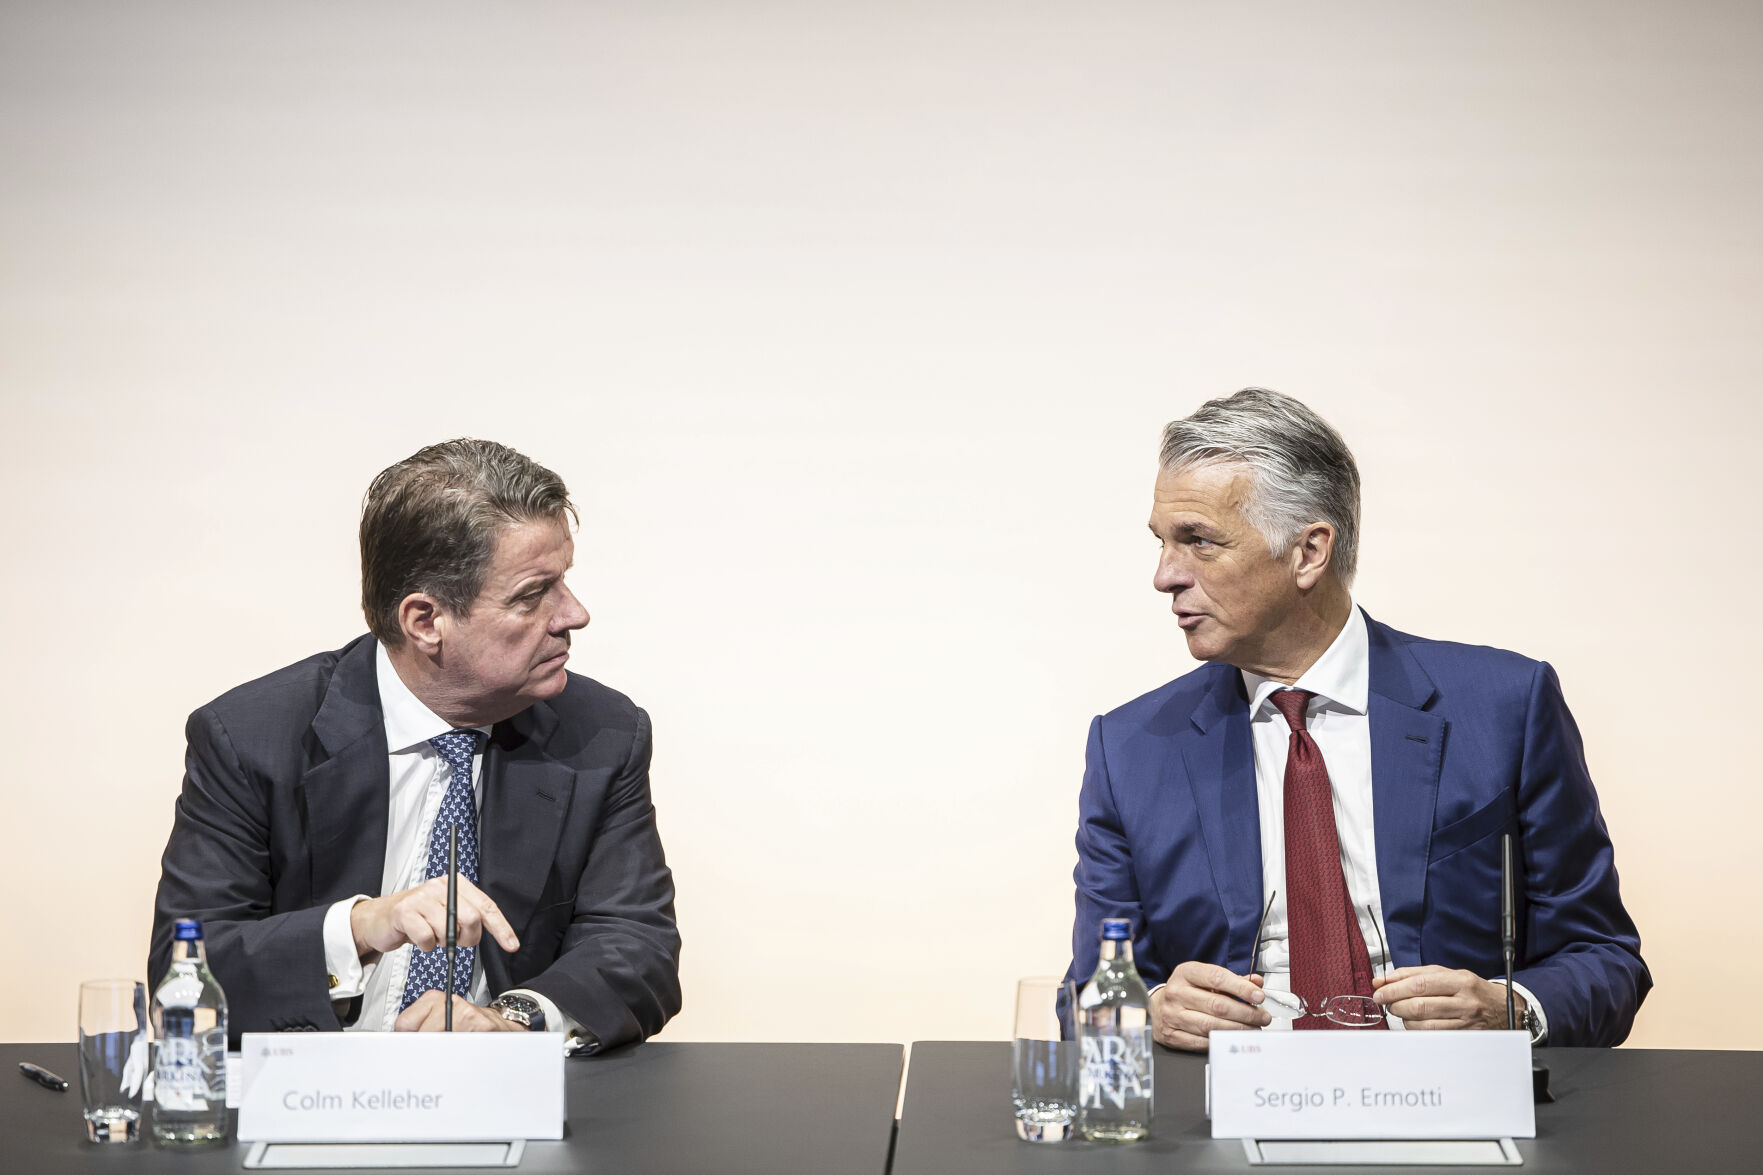 <p>Newly appointed Group Chief Executive Officer of Swiss Bank UBS Sergio Ermotti, right, UBS Chairman Colm Kelleher, left, speak during a news conference in Zurich, Switzerland Wednesday, March 29, 2023. (Michael Buholzer/Keystone via AP)</p>   PHOTO CREDIT: Michael Buholzer